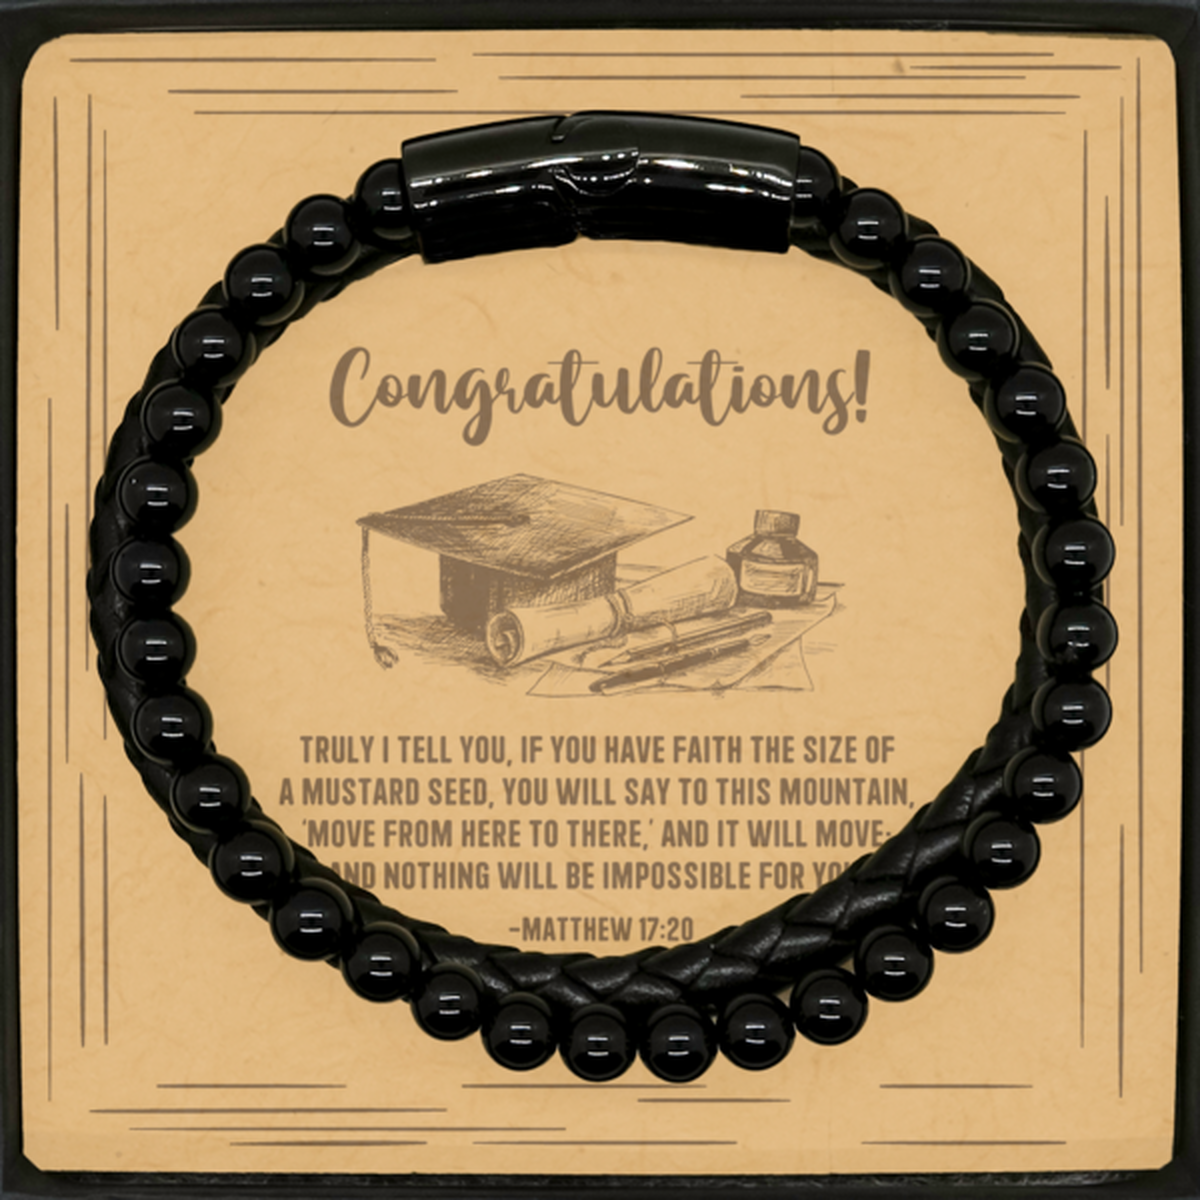 Religious Graduation Cards, Truly I tell you, if you have faith, Bible Verse Stone Leather Bracelet, Christian Graduation Gifts